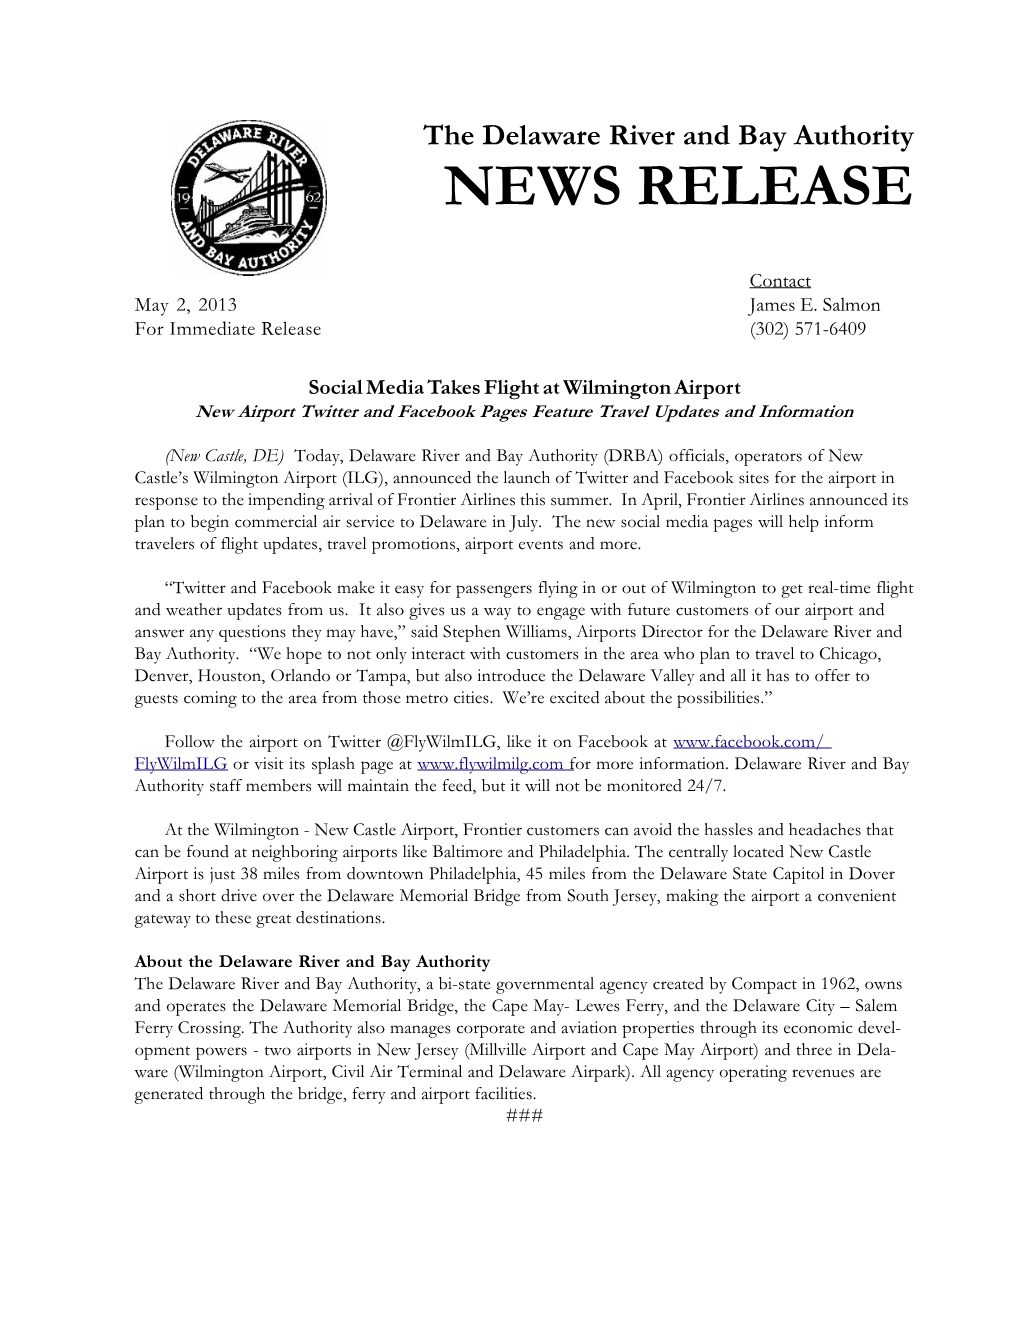 The Delaware River and Bay Authority NEWS RELEASE